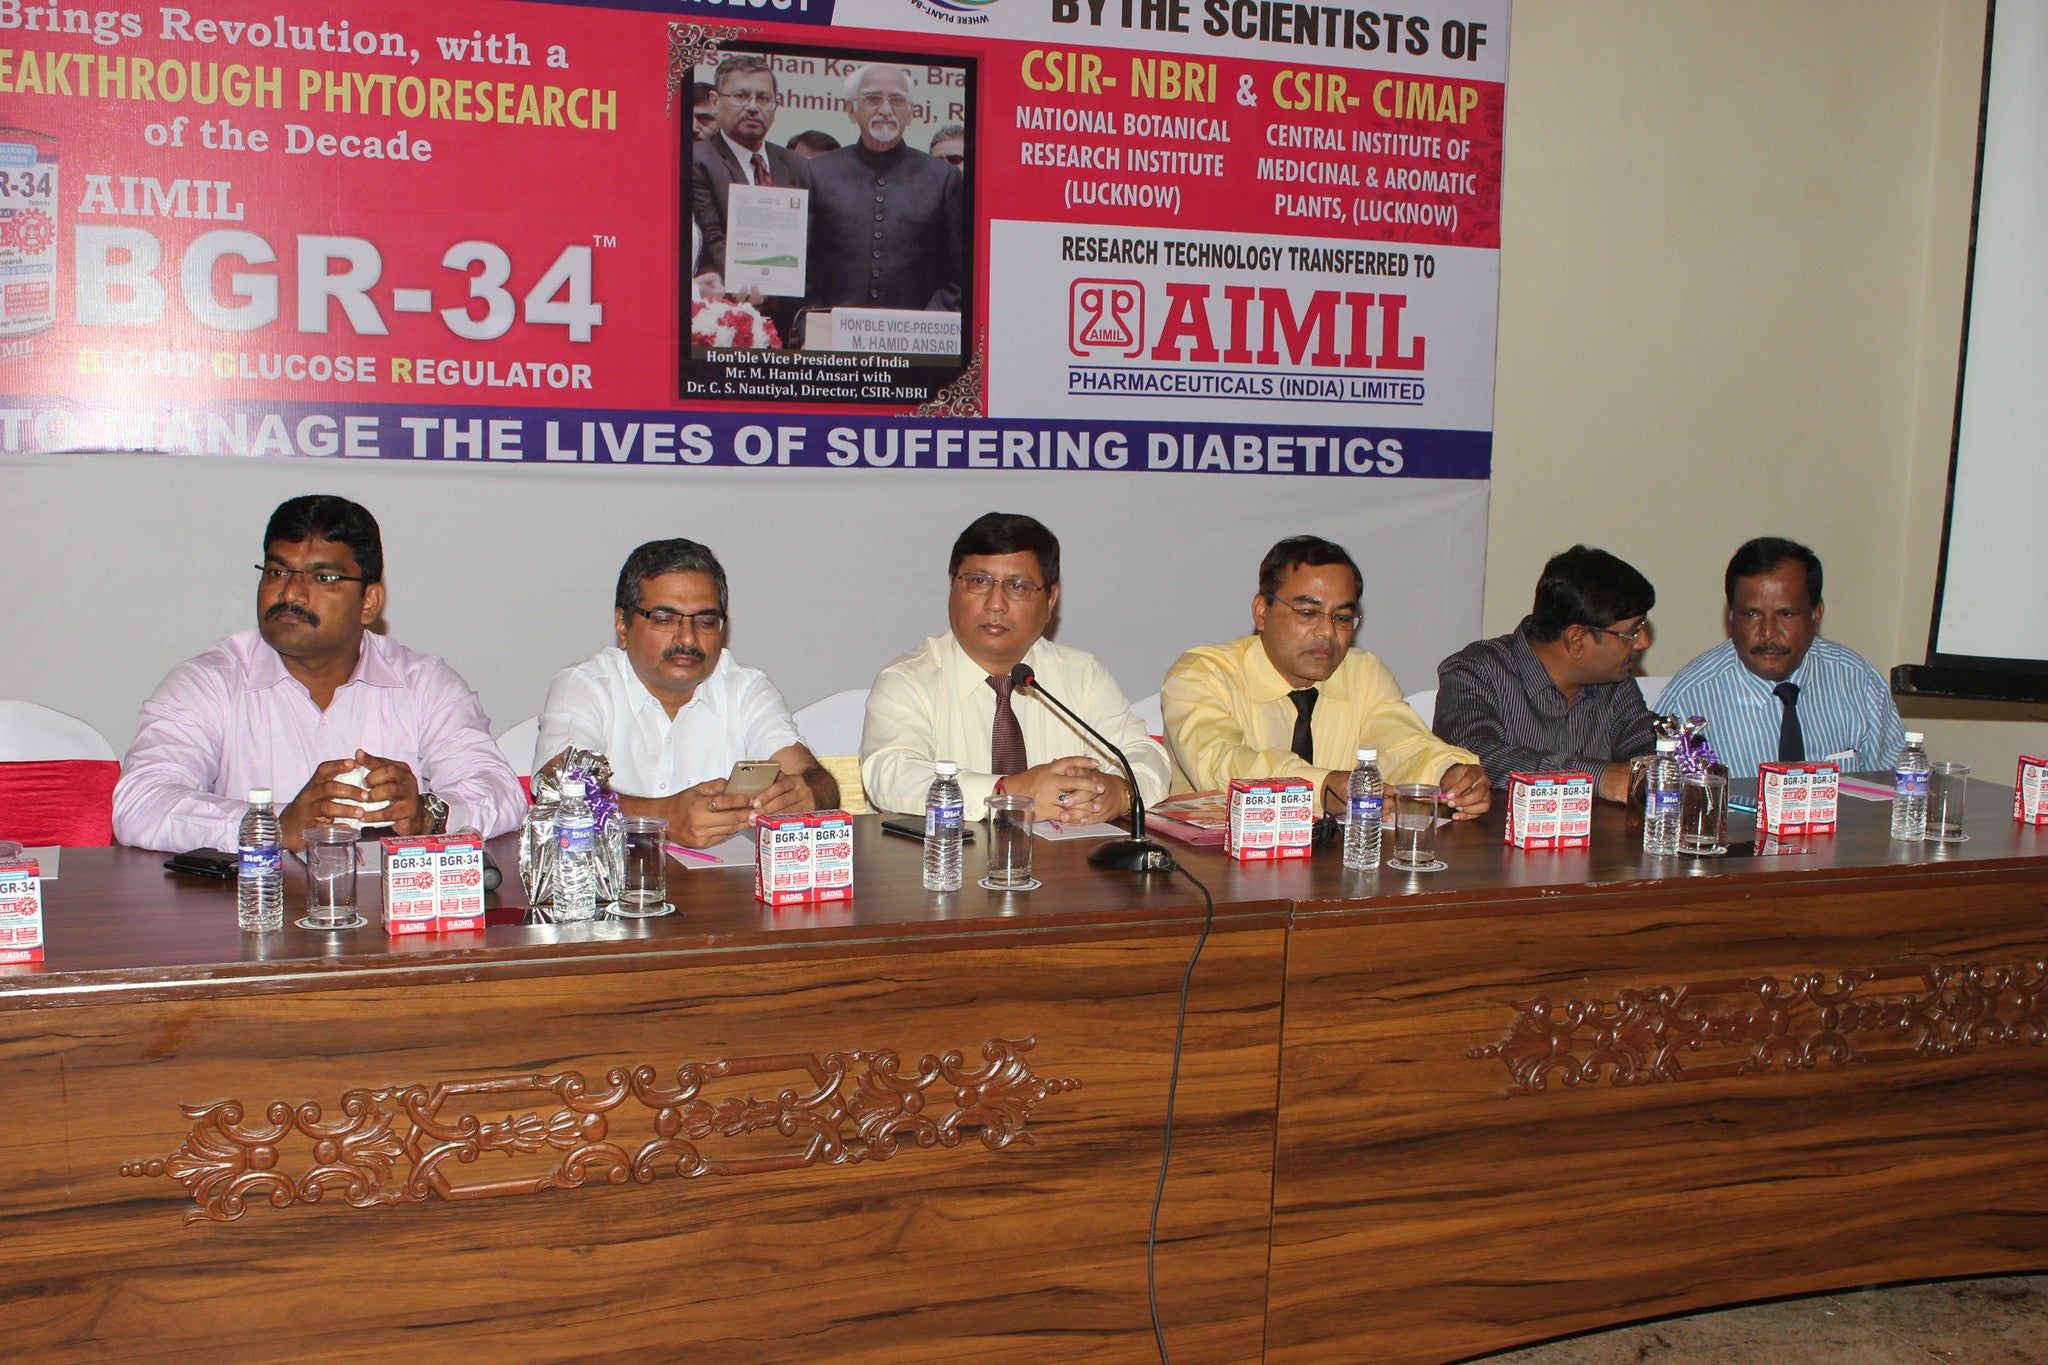 Affordable Ayurvedic Drug to Fight Diabetes Launched In Chennai: Priced At Rs 5